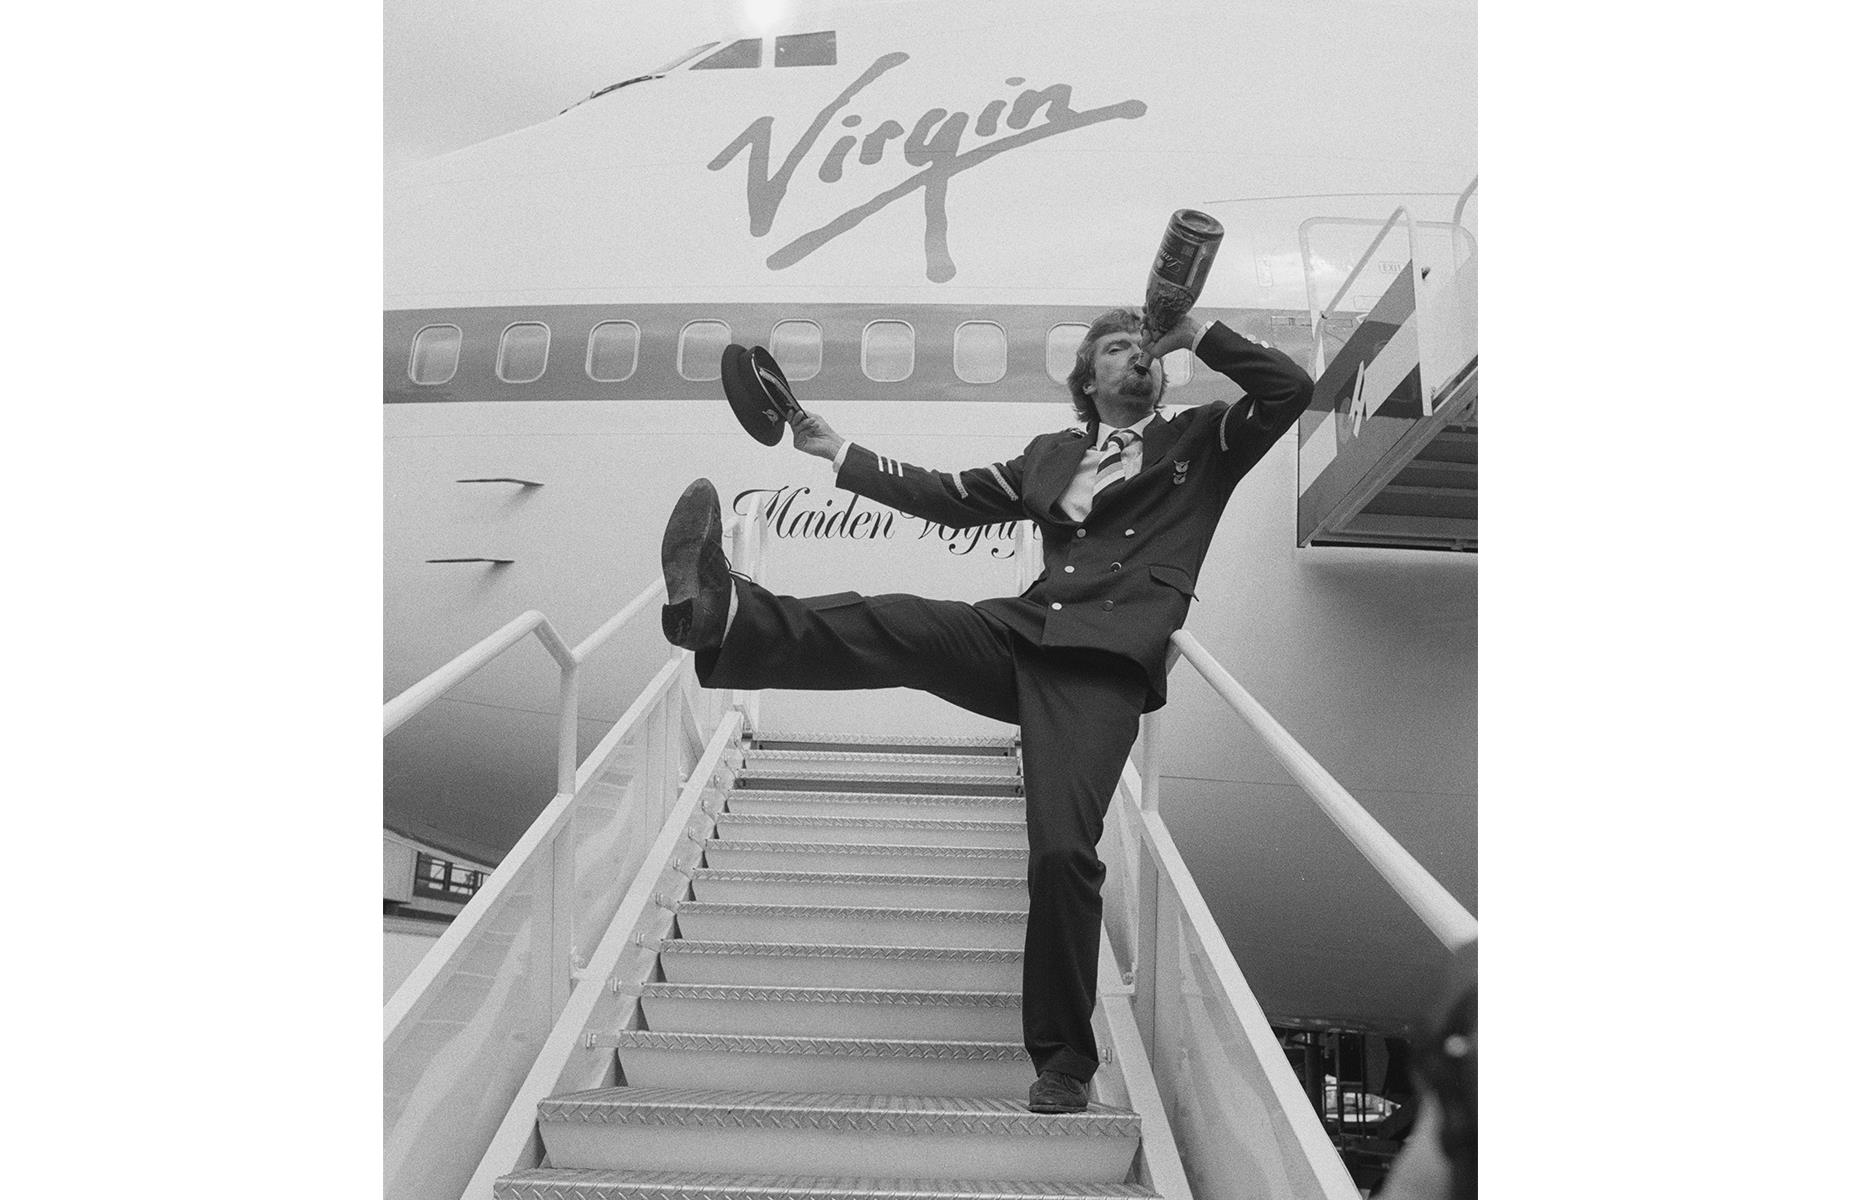 Balancing out the rise of the low-cost carrier, Virgin Atlantic Airways was also launched in this decade. Branson's mission was to pay homage to the golden era of travel by elevating the experience of flying once more, offering passengers a luxurious but not unattainable journey. On 22 June 1984, Branson celebrates the launch of his new airline.